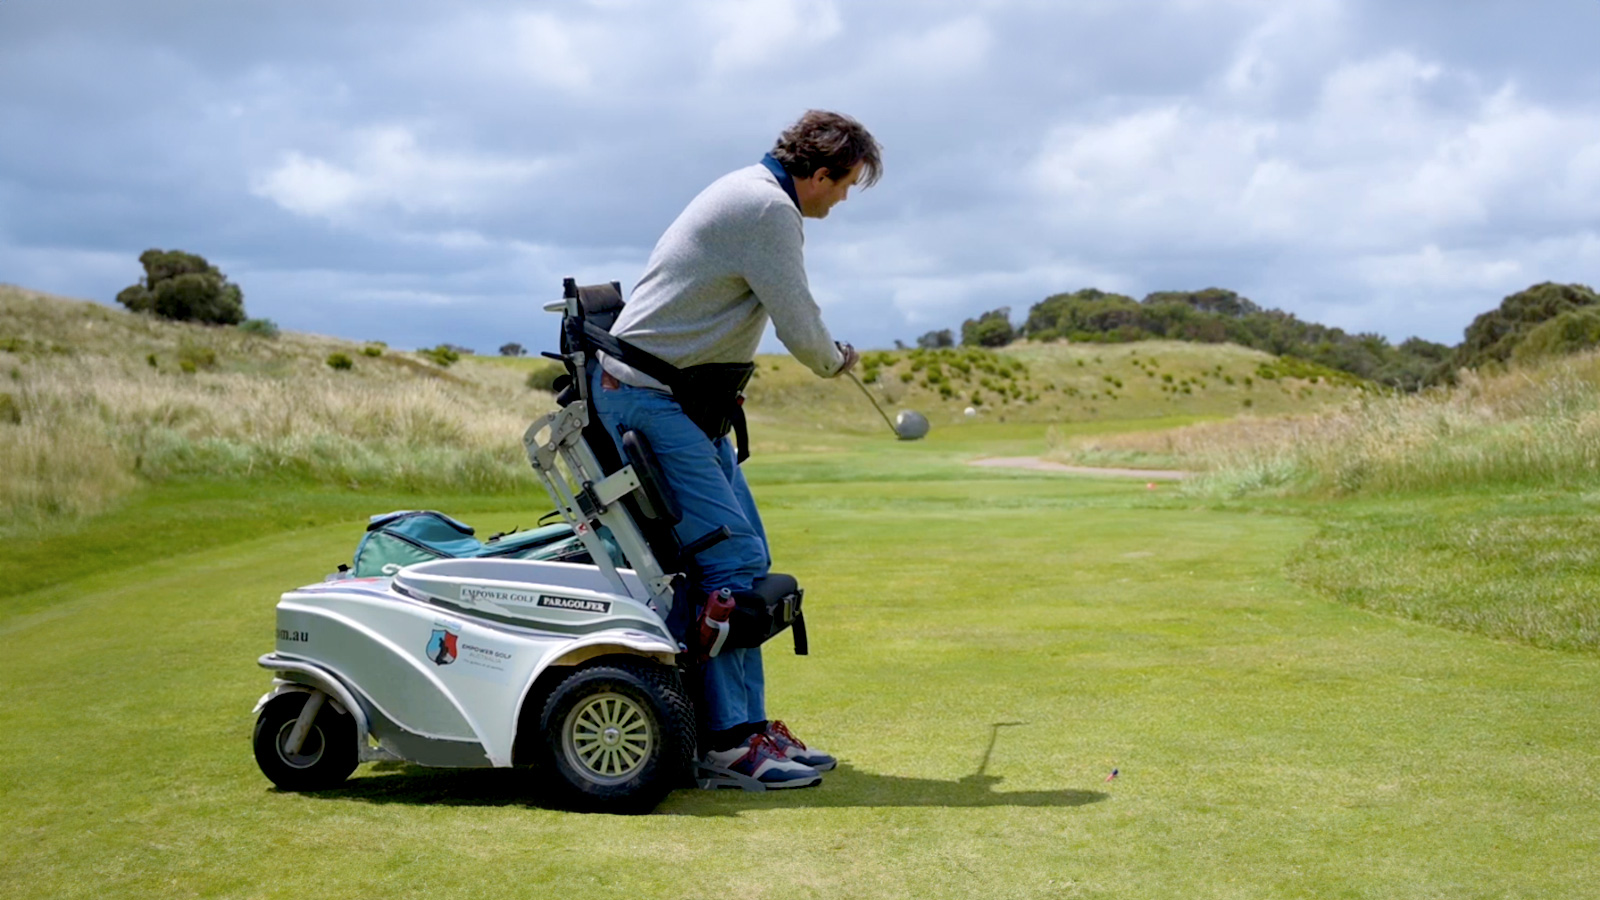 Empower Golf partners with Walkinshaw Sports and Under Armour